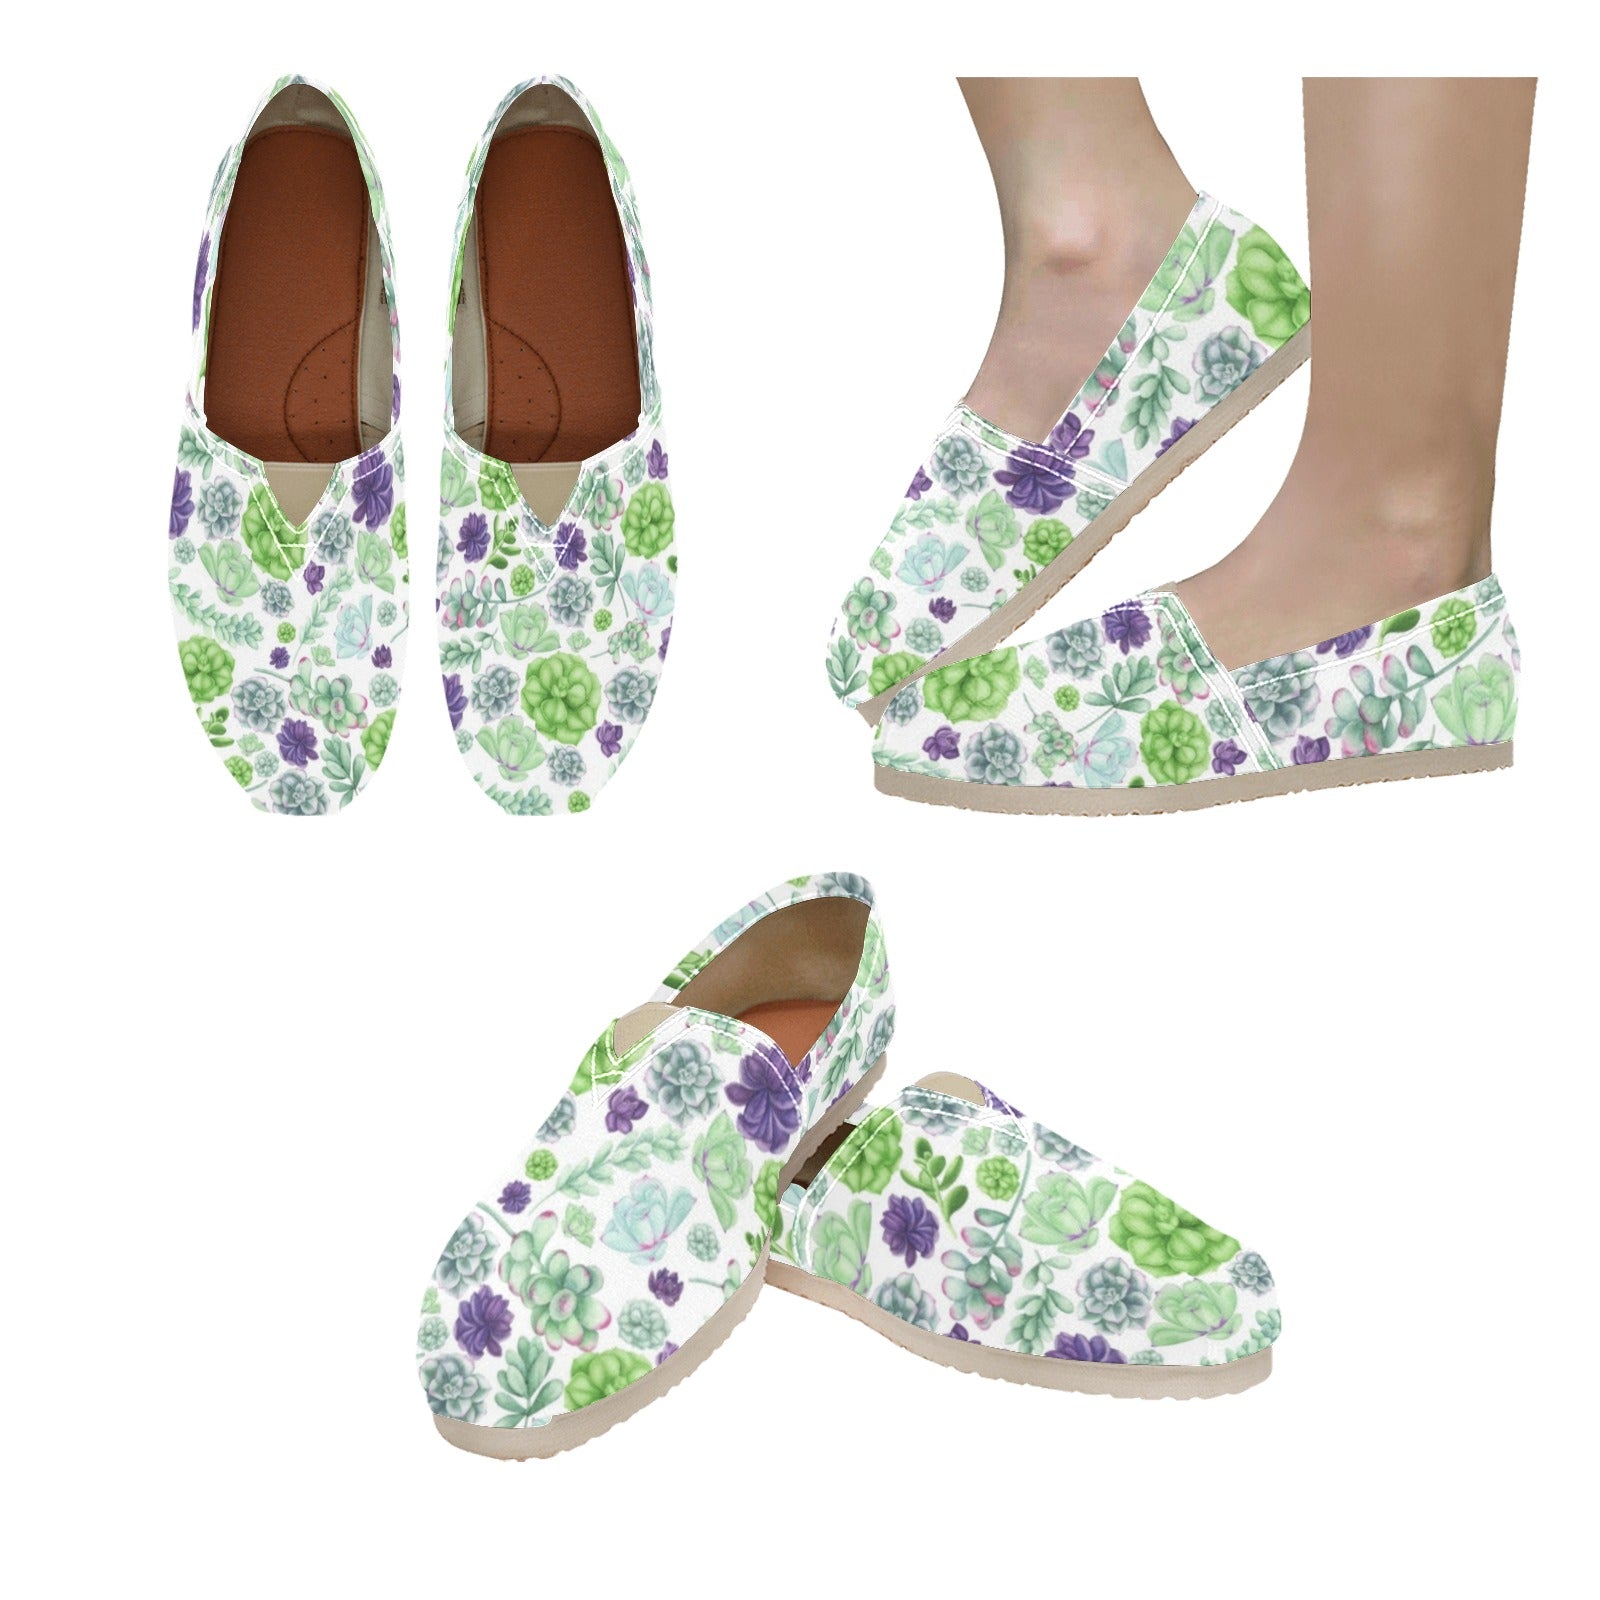 Succulents - Casual Canvas Slip-on Shoes